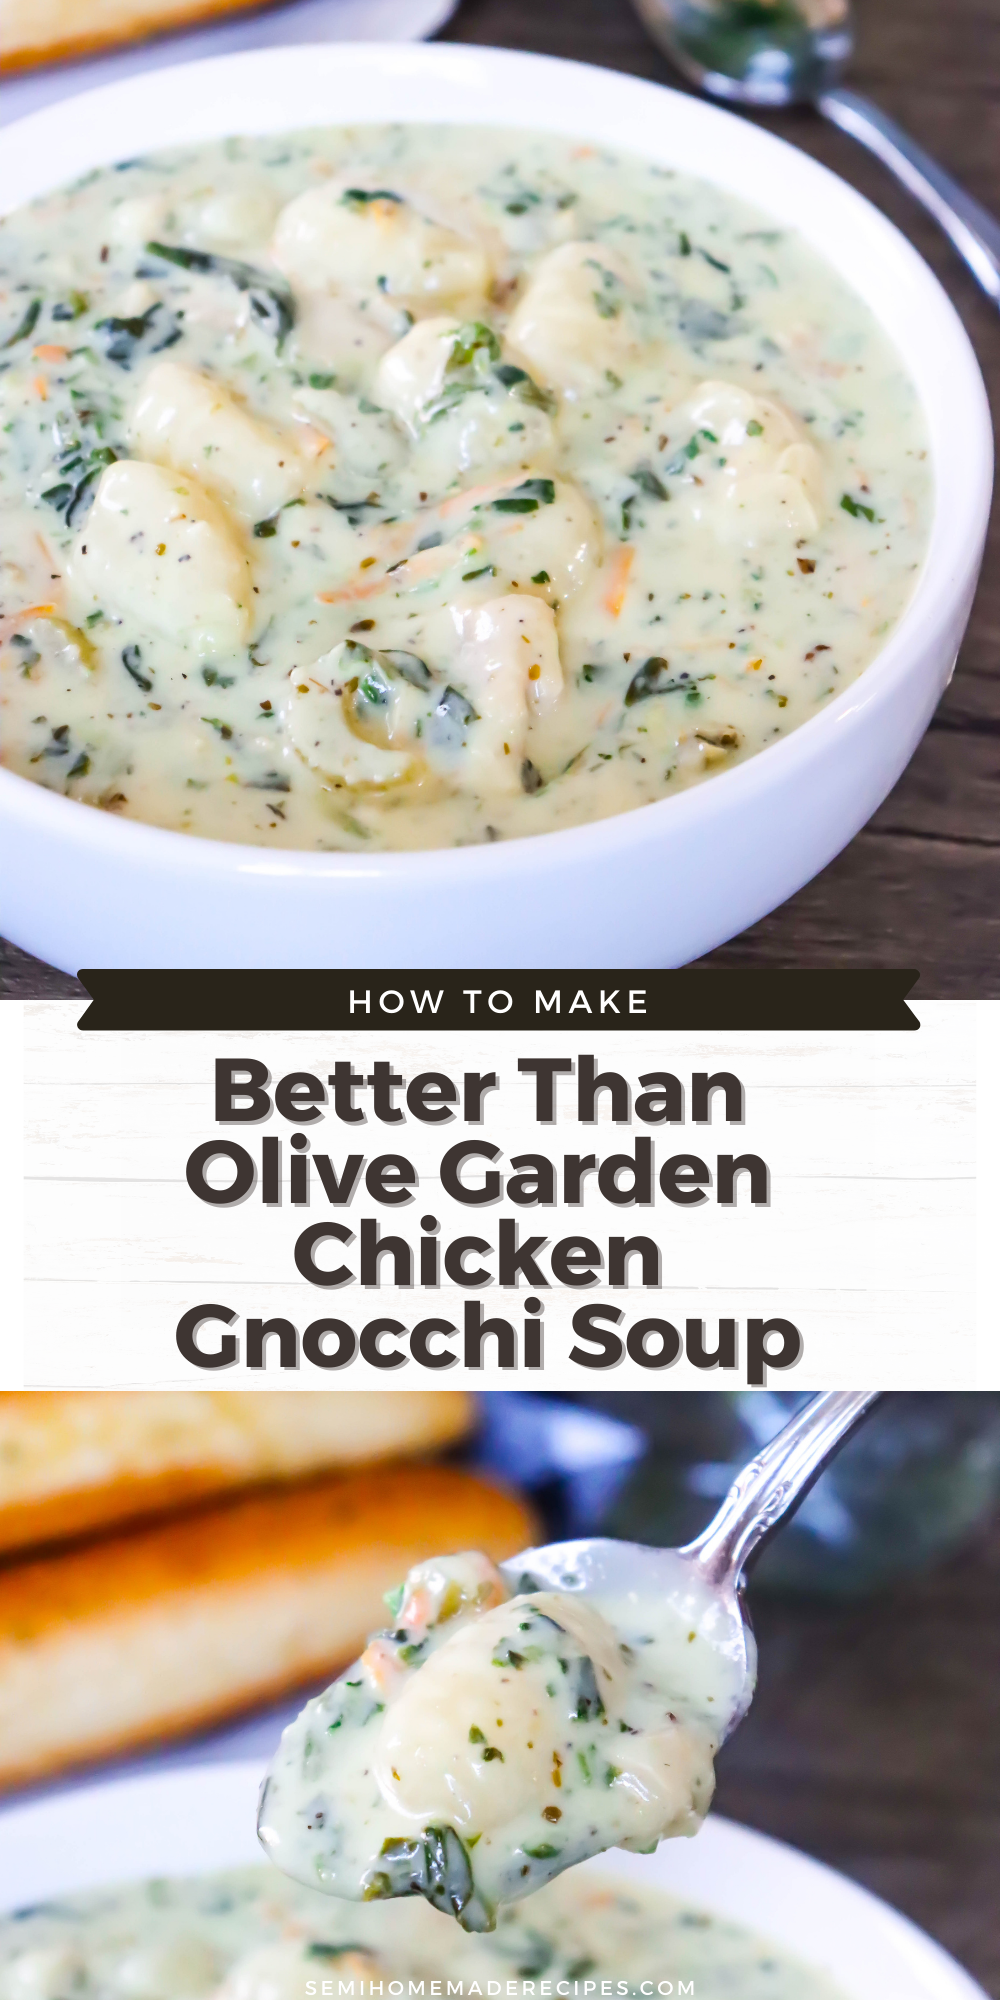 Love the Chicken Gnocchi Soup from Olive Garden? If so, you're going to fall head over heals for this Olive Garden Copycat recipe! This soup is Better Than Olive Garden Chicken Gnocchi Soup and it's full of flavor, chicken and gnocchi!